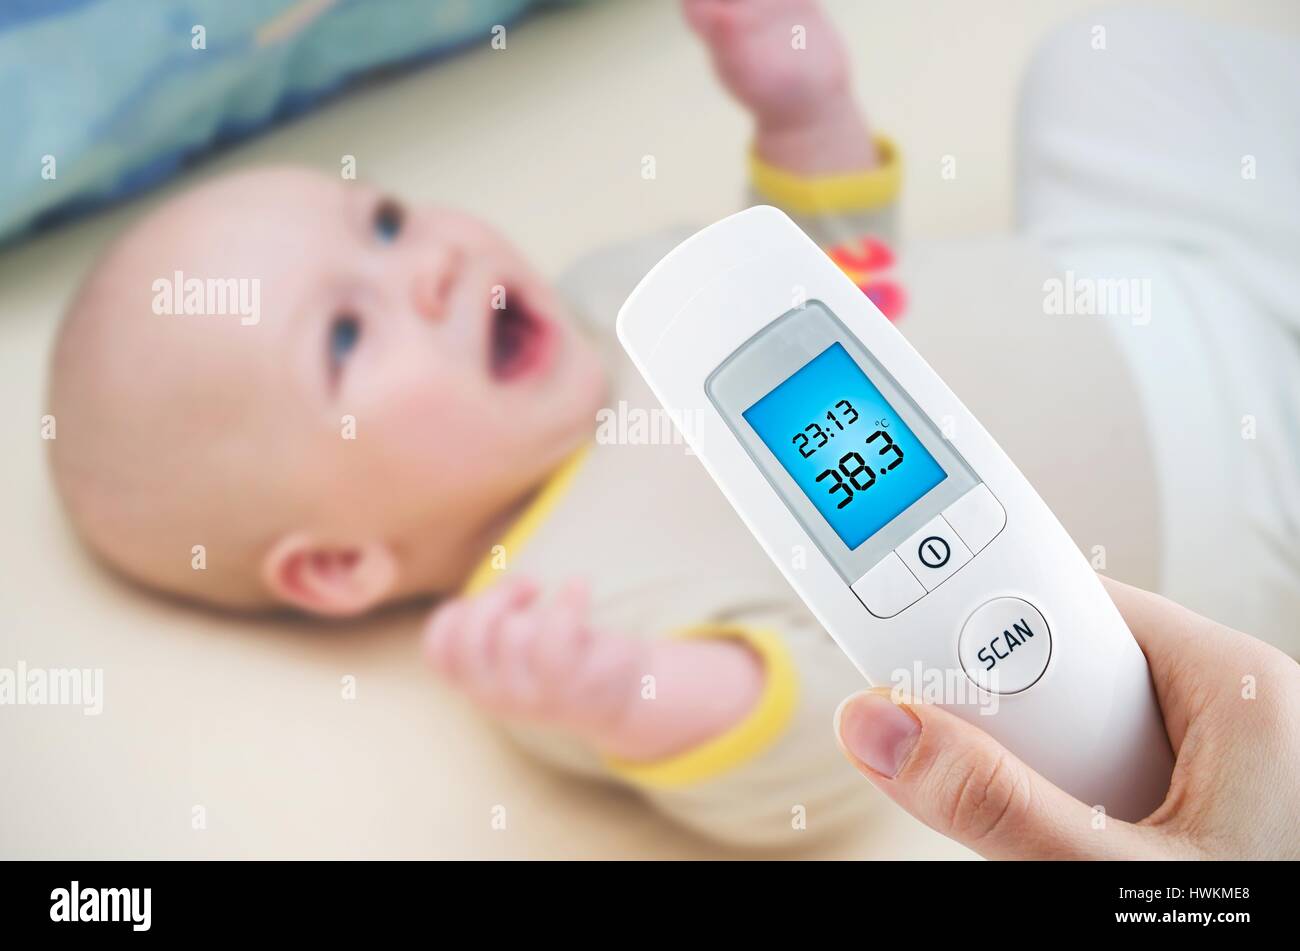 https://c8.alamy.com/comp/HWKME8/measuring-temperature-to-a-baby-with-digital-thermometer-HWKME8.jpg